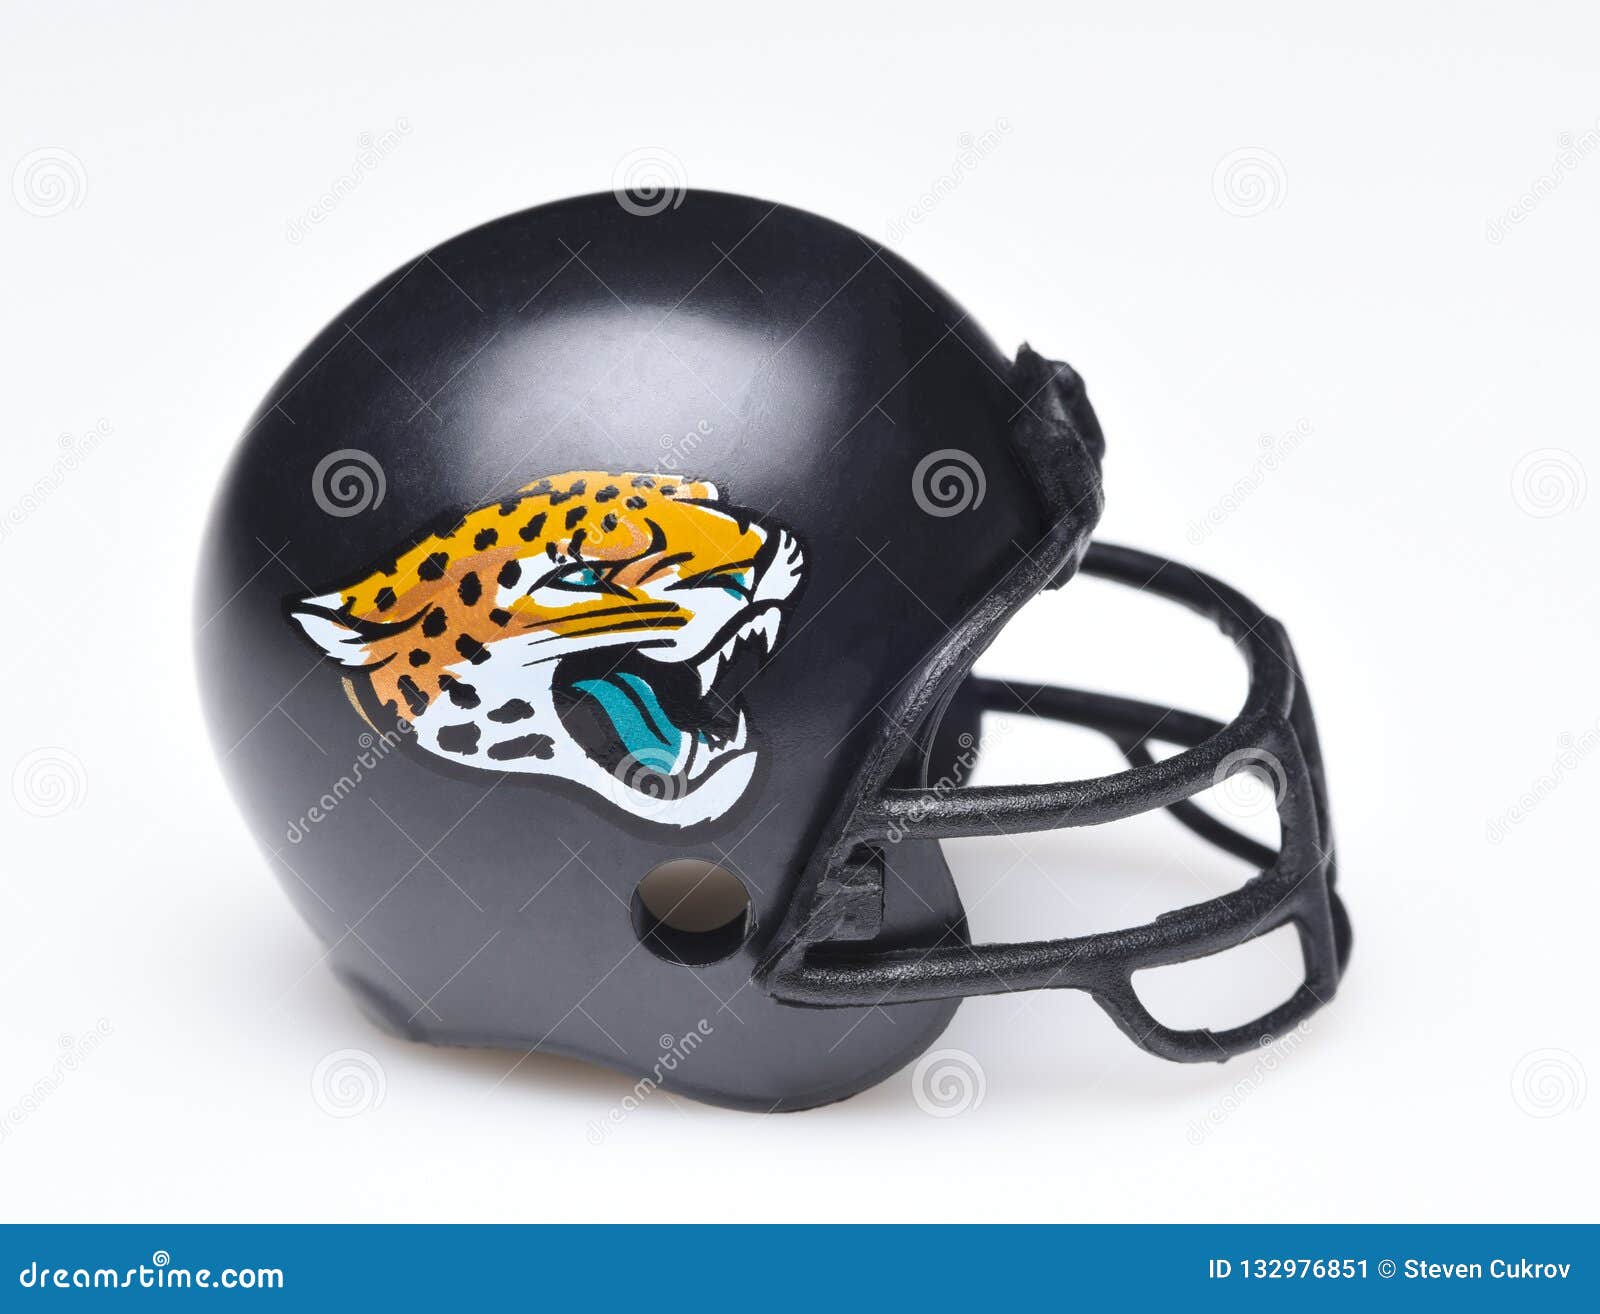 125 Helmet Jaguars Stock Photos - Free & Royalty-Free Stock Photos from  Dreamstime